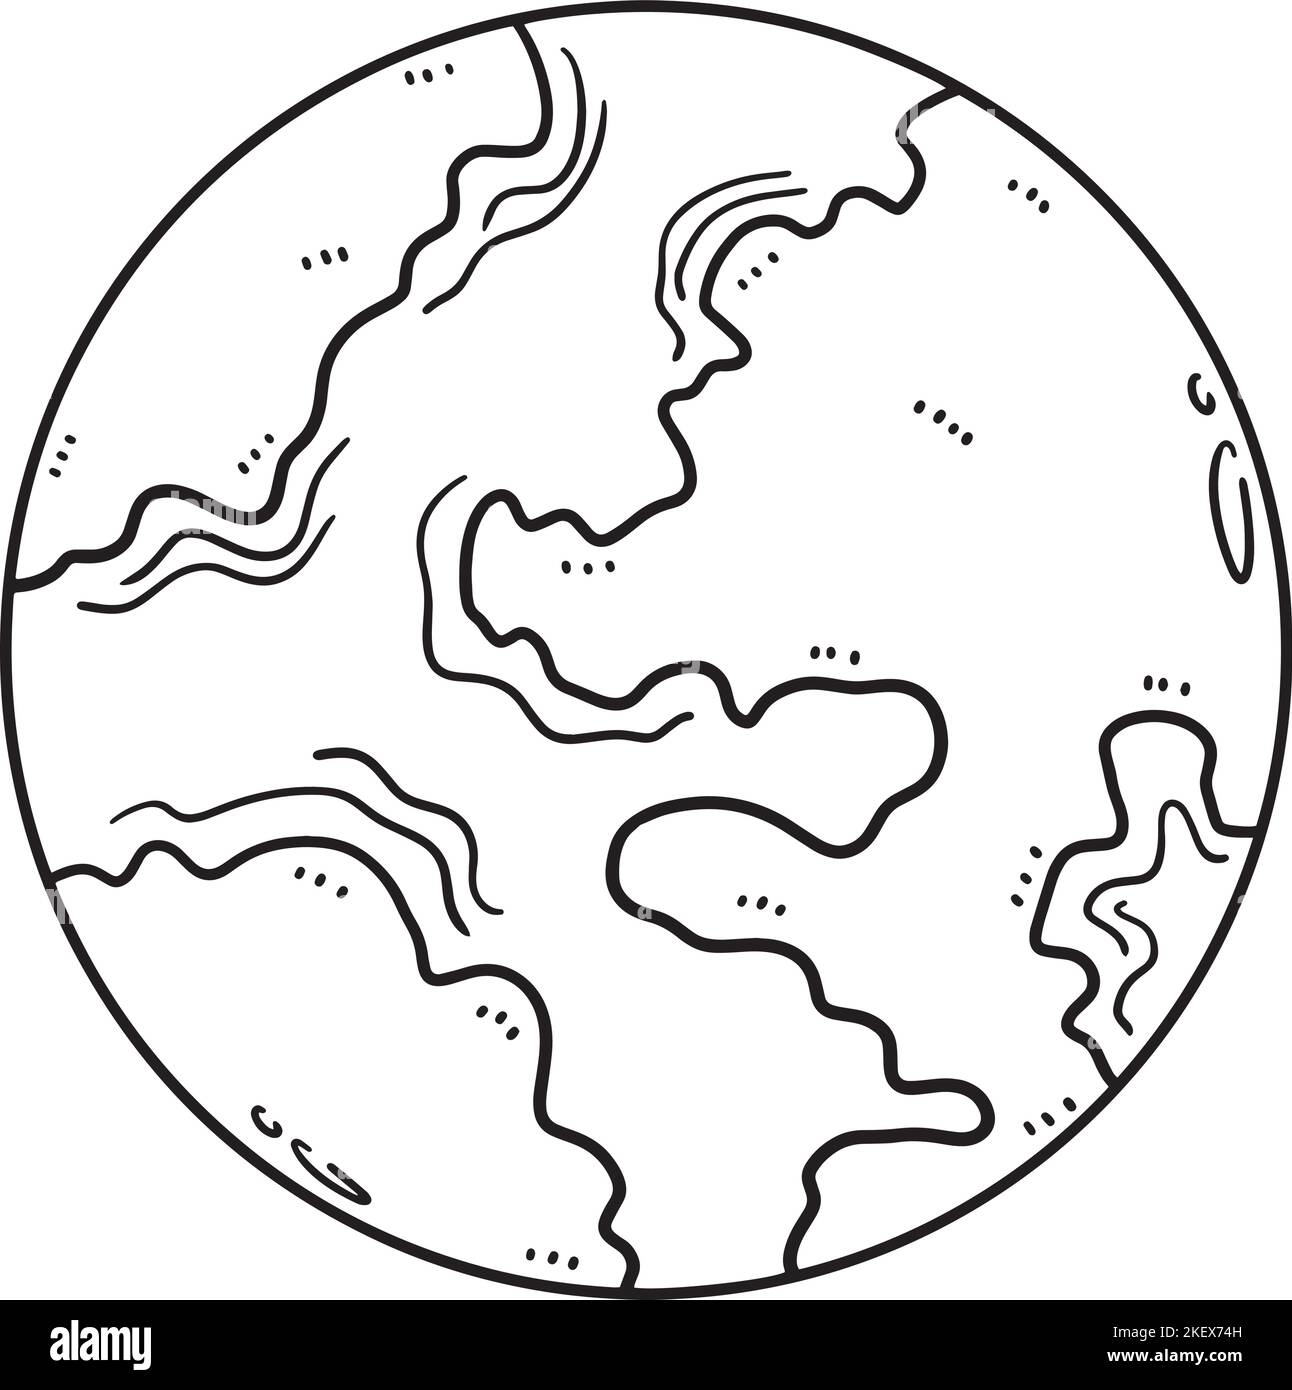 Earth Day Isolated Coloring Page for Kids Stock Vector